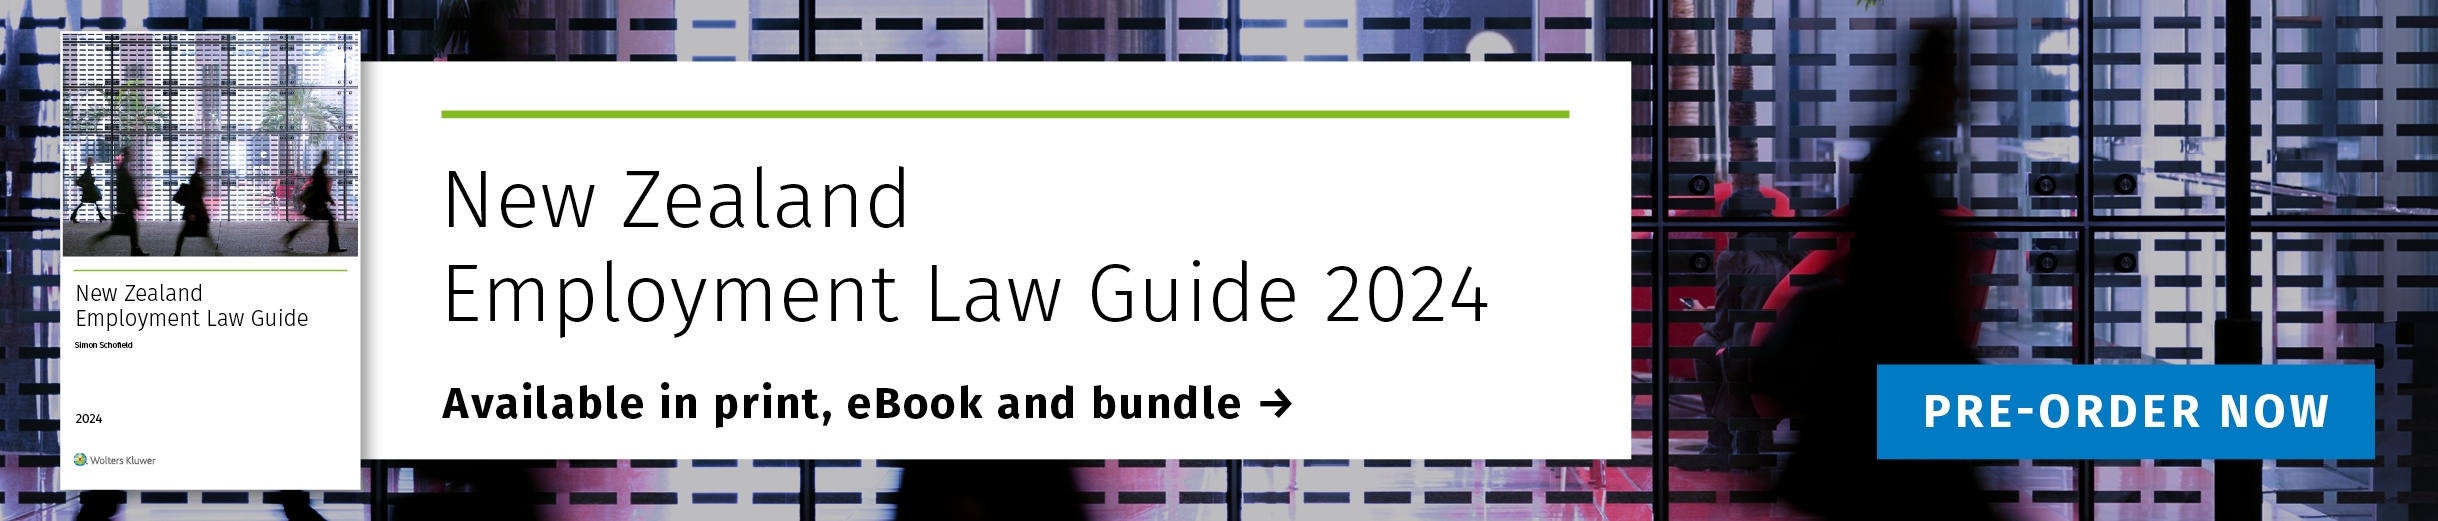 New Zealand Employment Law Guide 2024 Edition